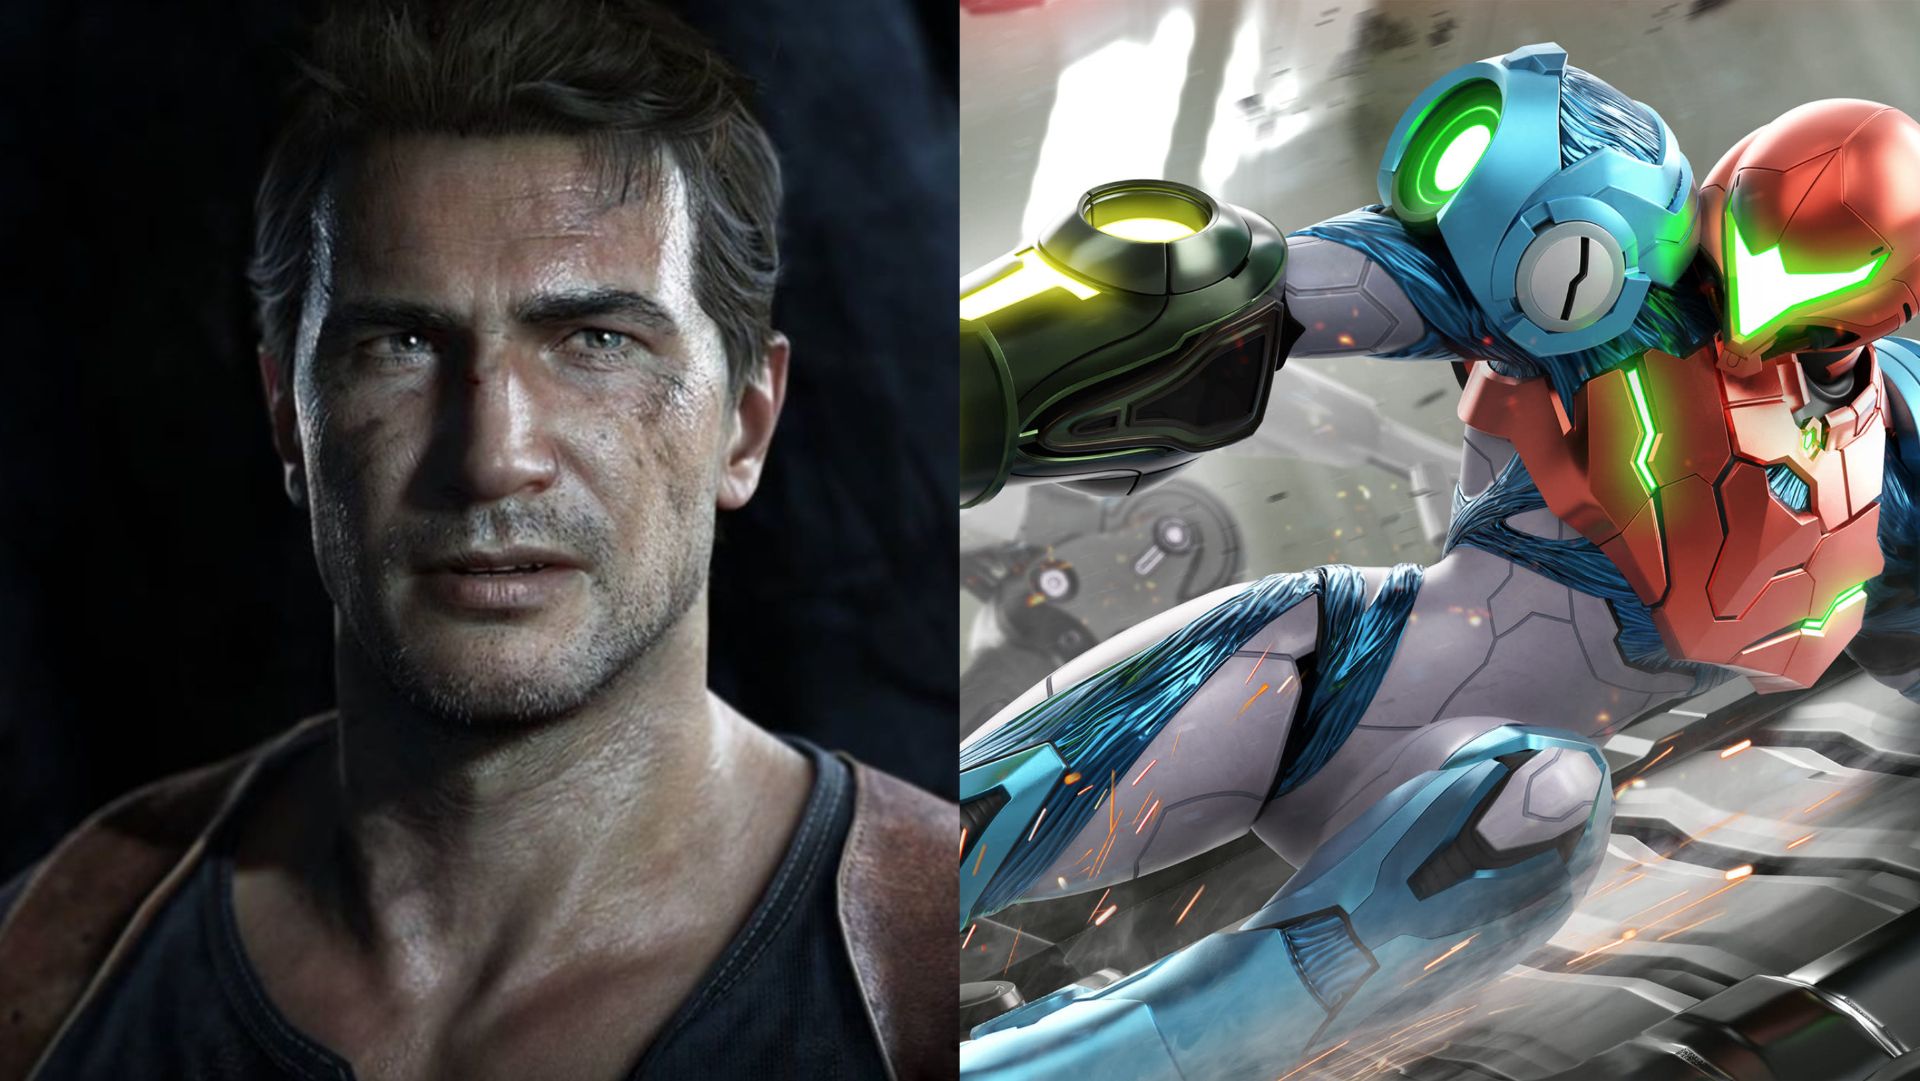 Split image of Nathan Drake from Uncharted and Samus Aran from Metroid.